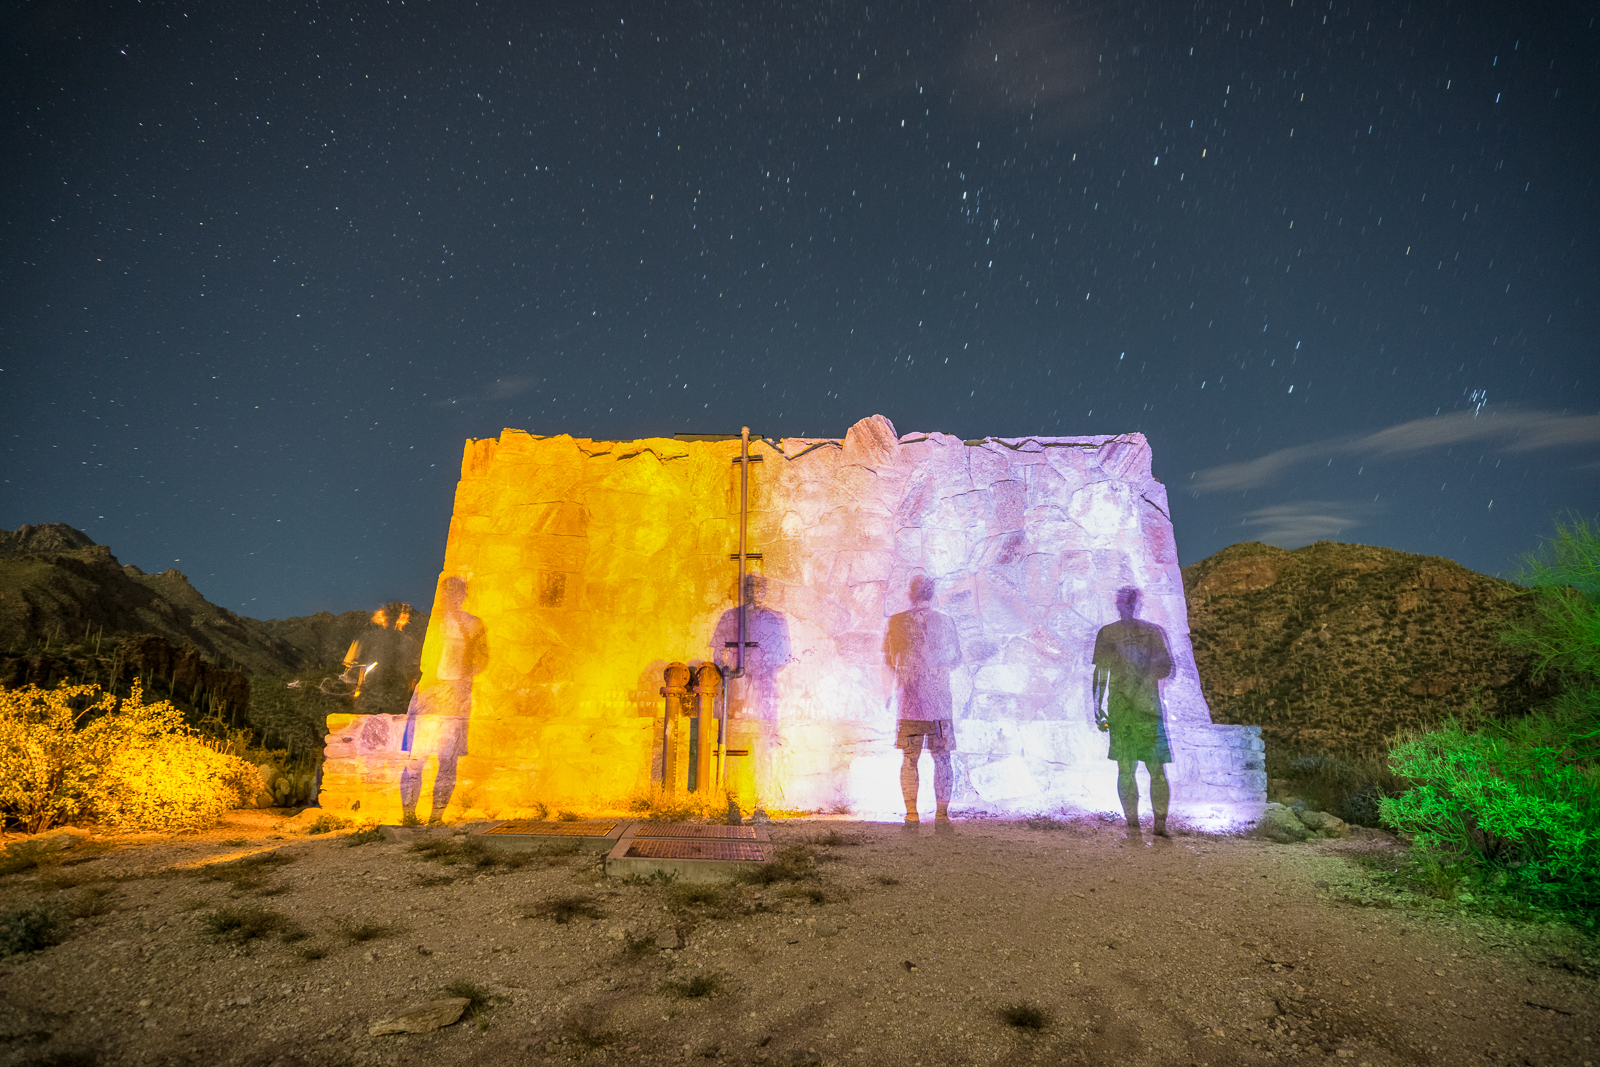 Painting the stone water tank above Sabino Canyon with light. September 2016.